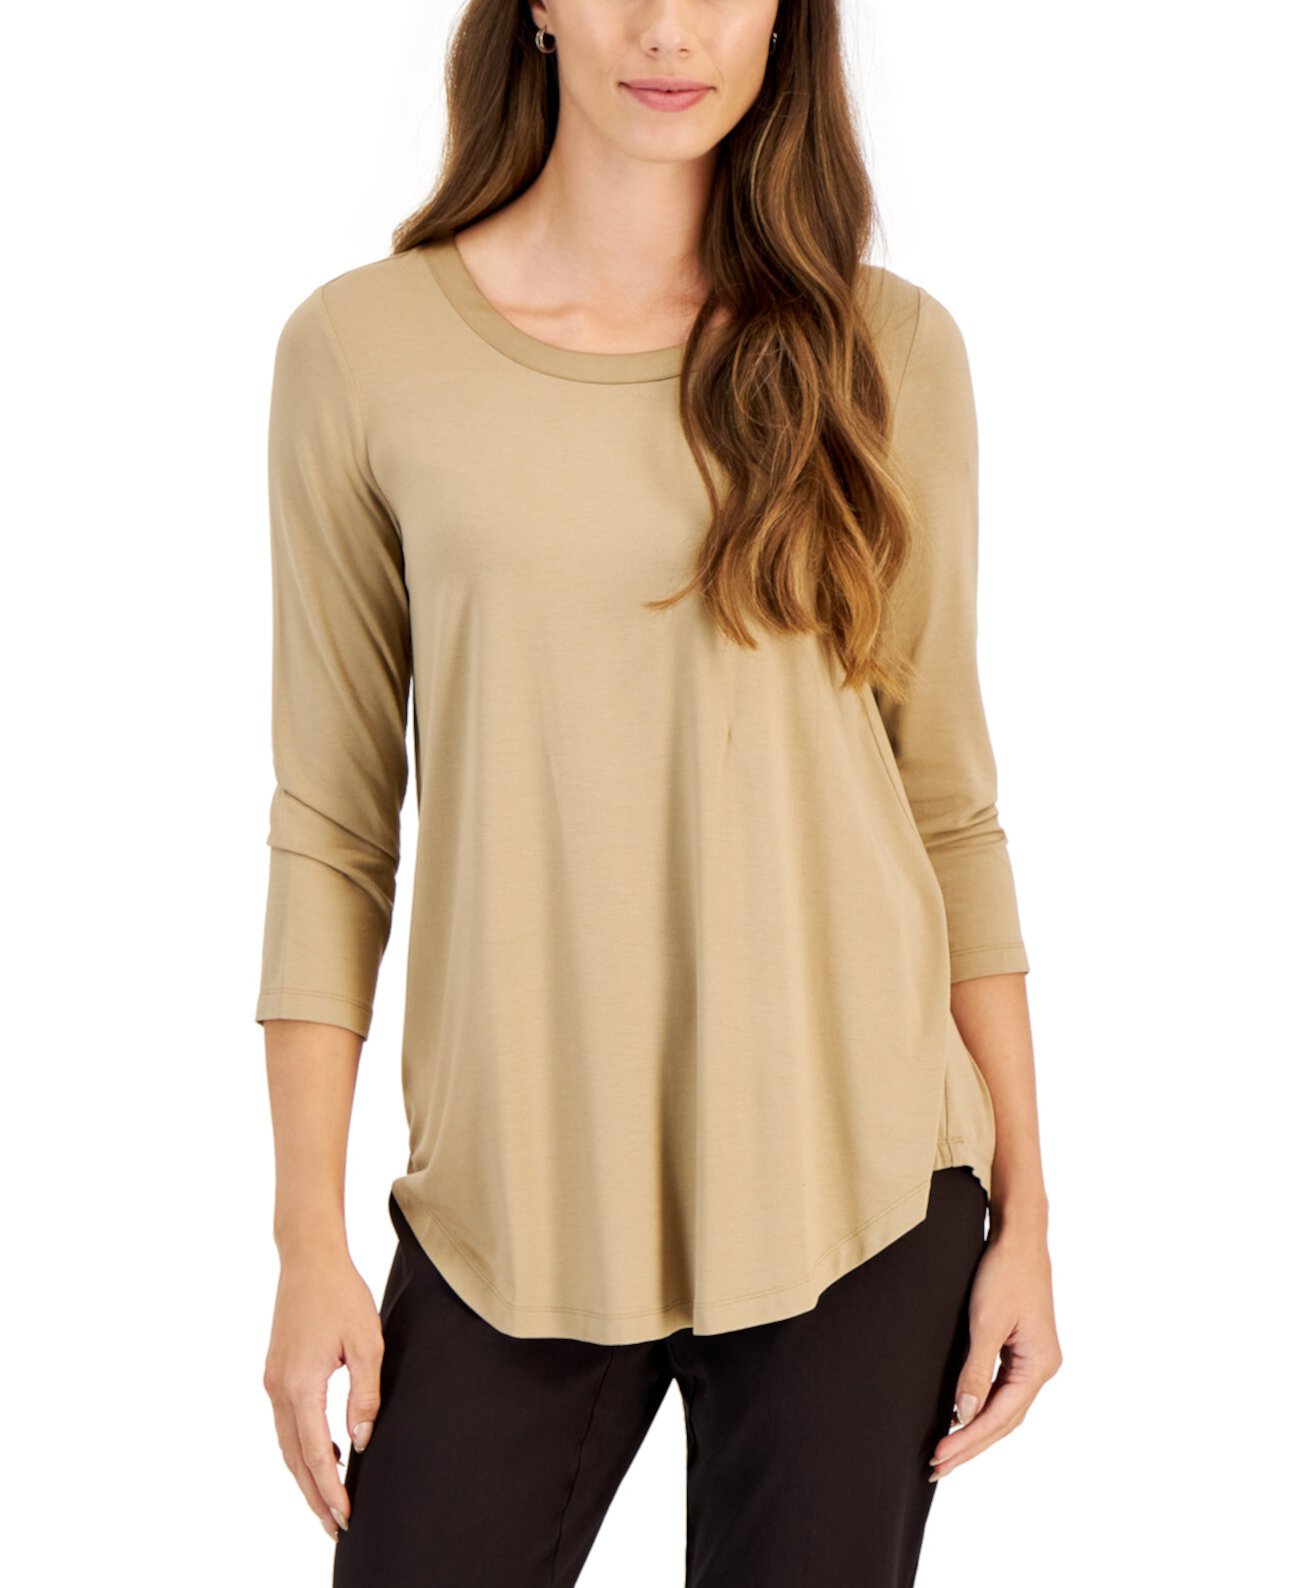 Petite Satin-Trim 3/4-Sleeve Top, Created for Macy's J&M Collection